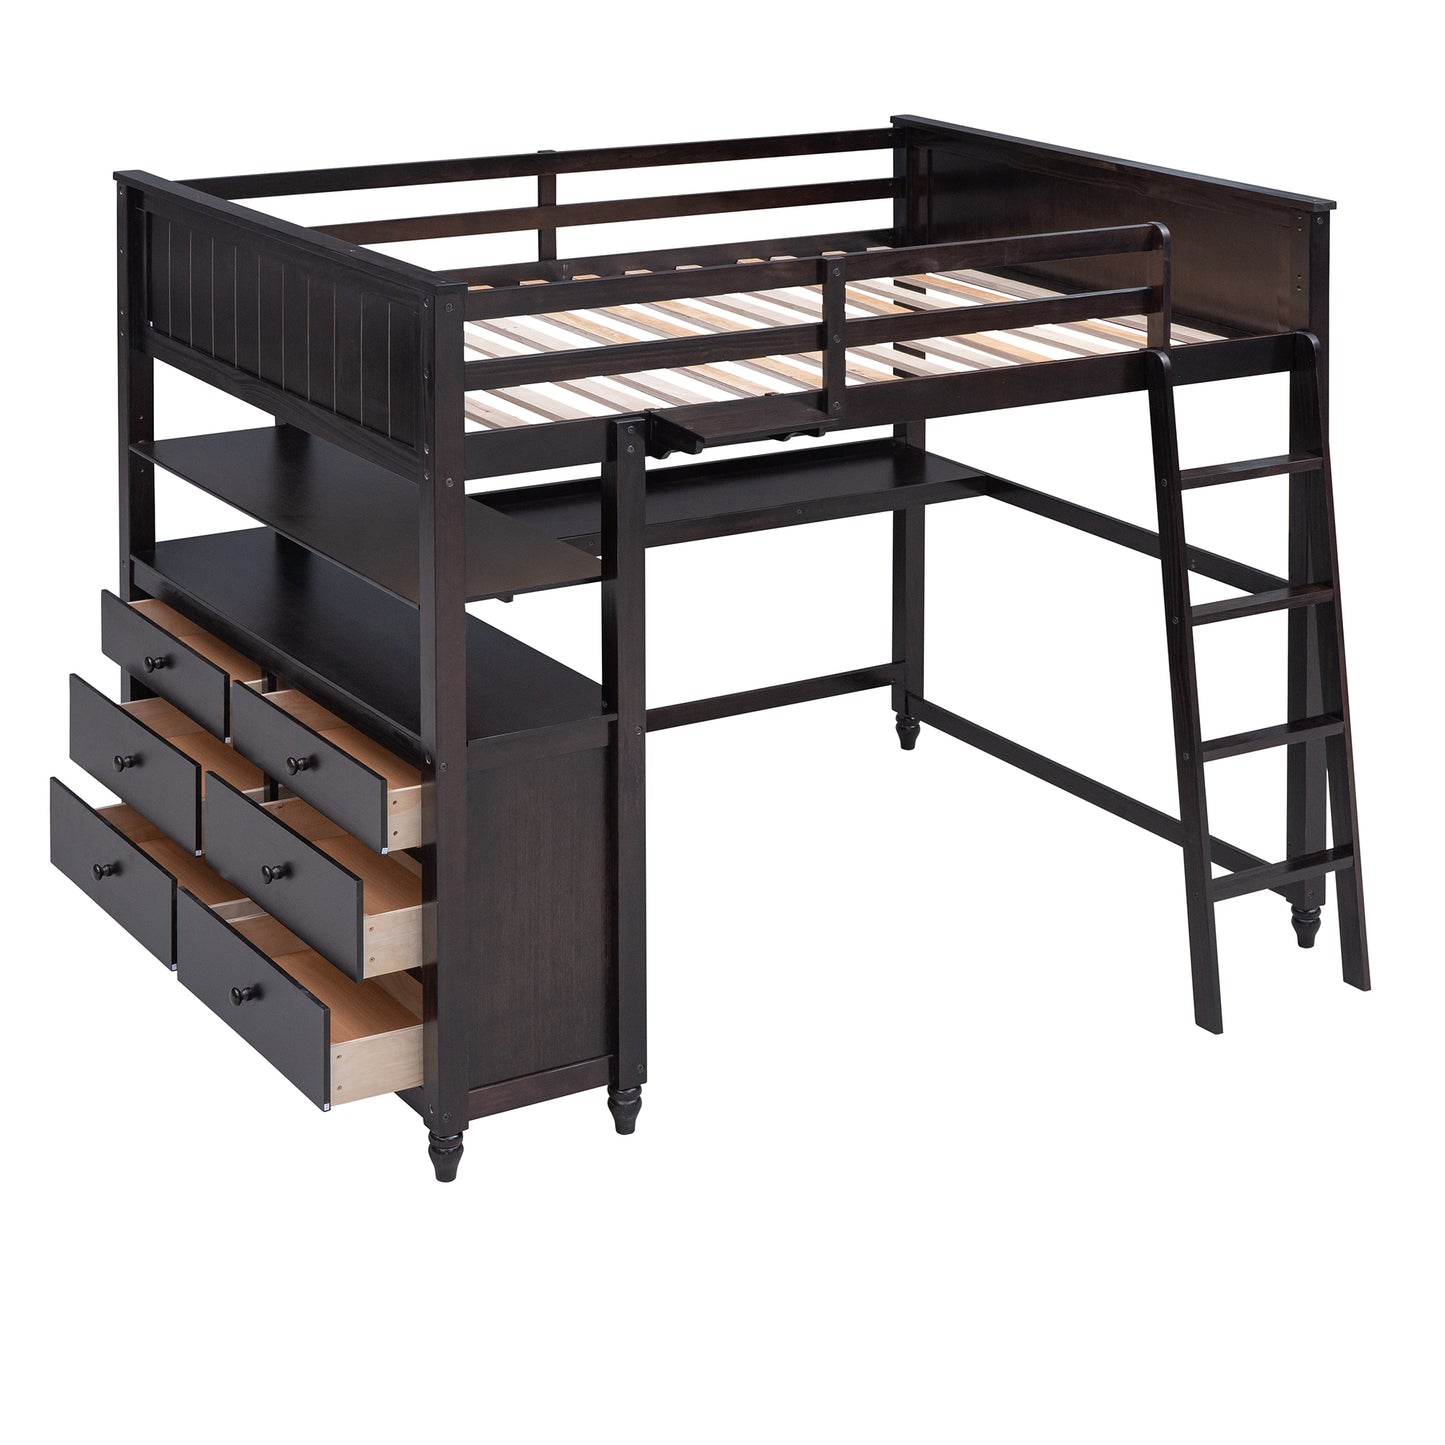 Full size Loft Bed with Drawers and Desk, Wooden Loft Bed with Shelves - Espresso